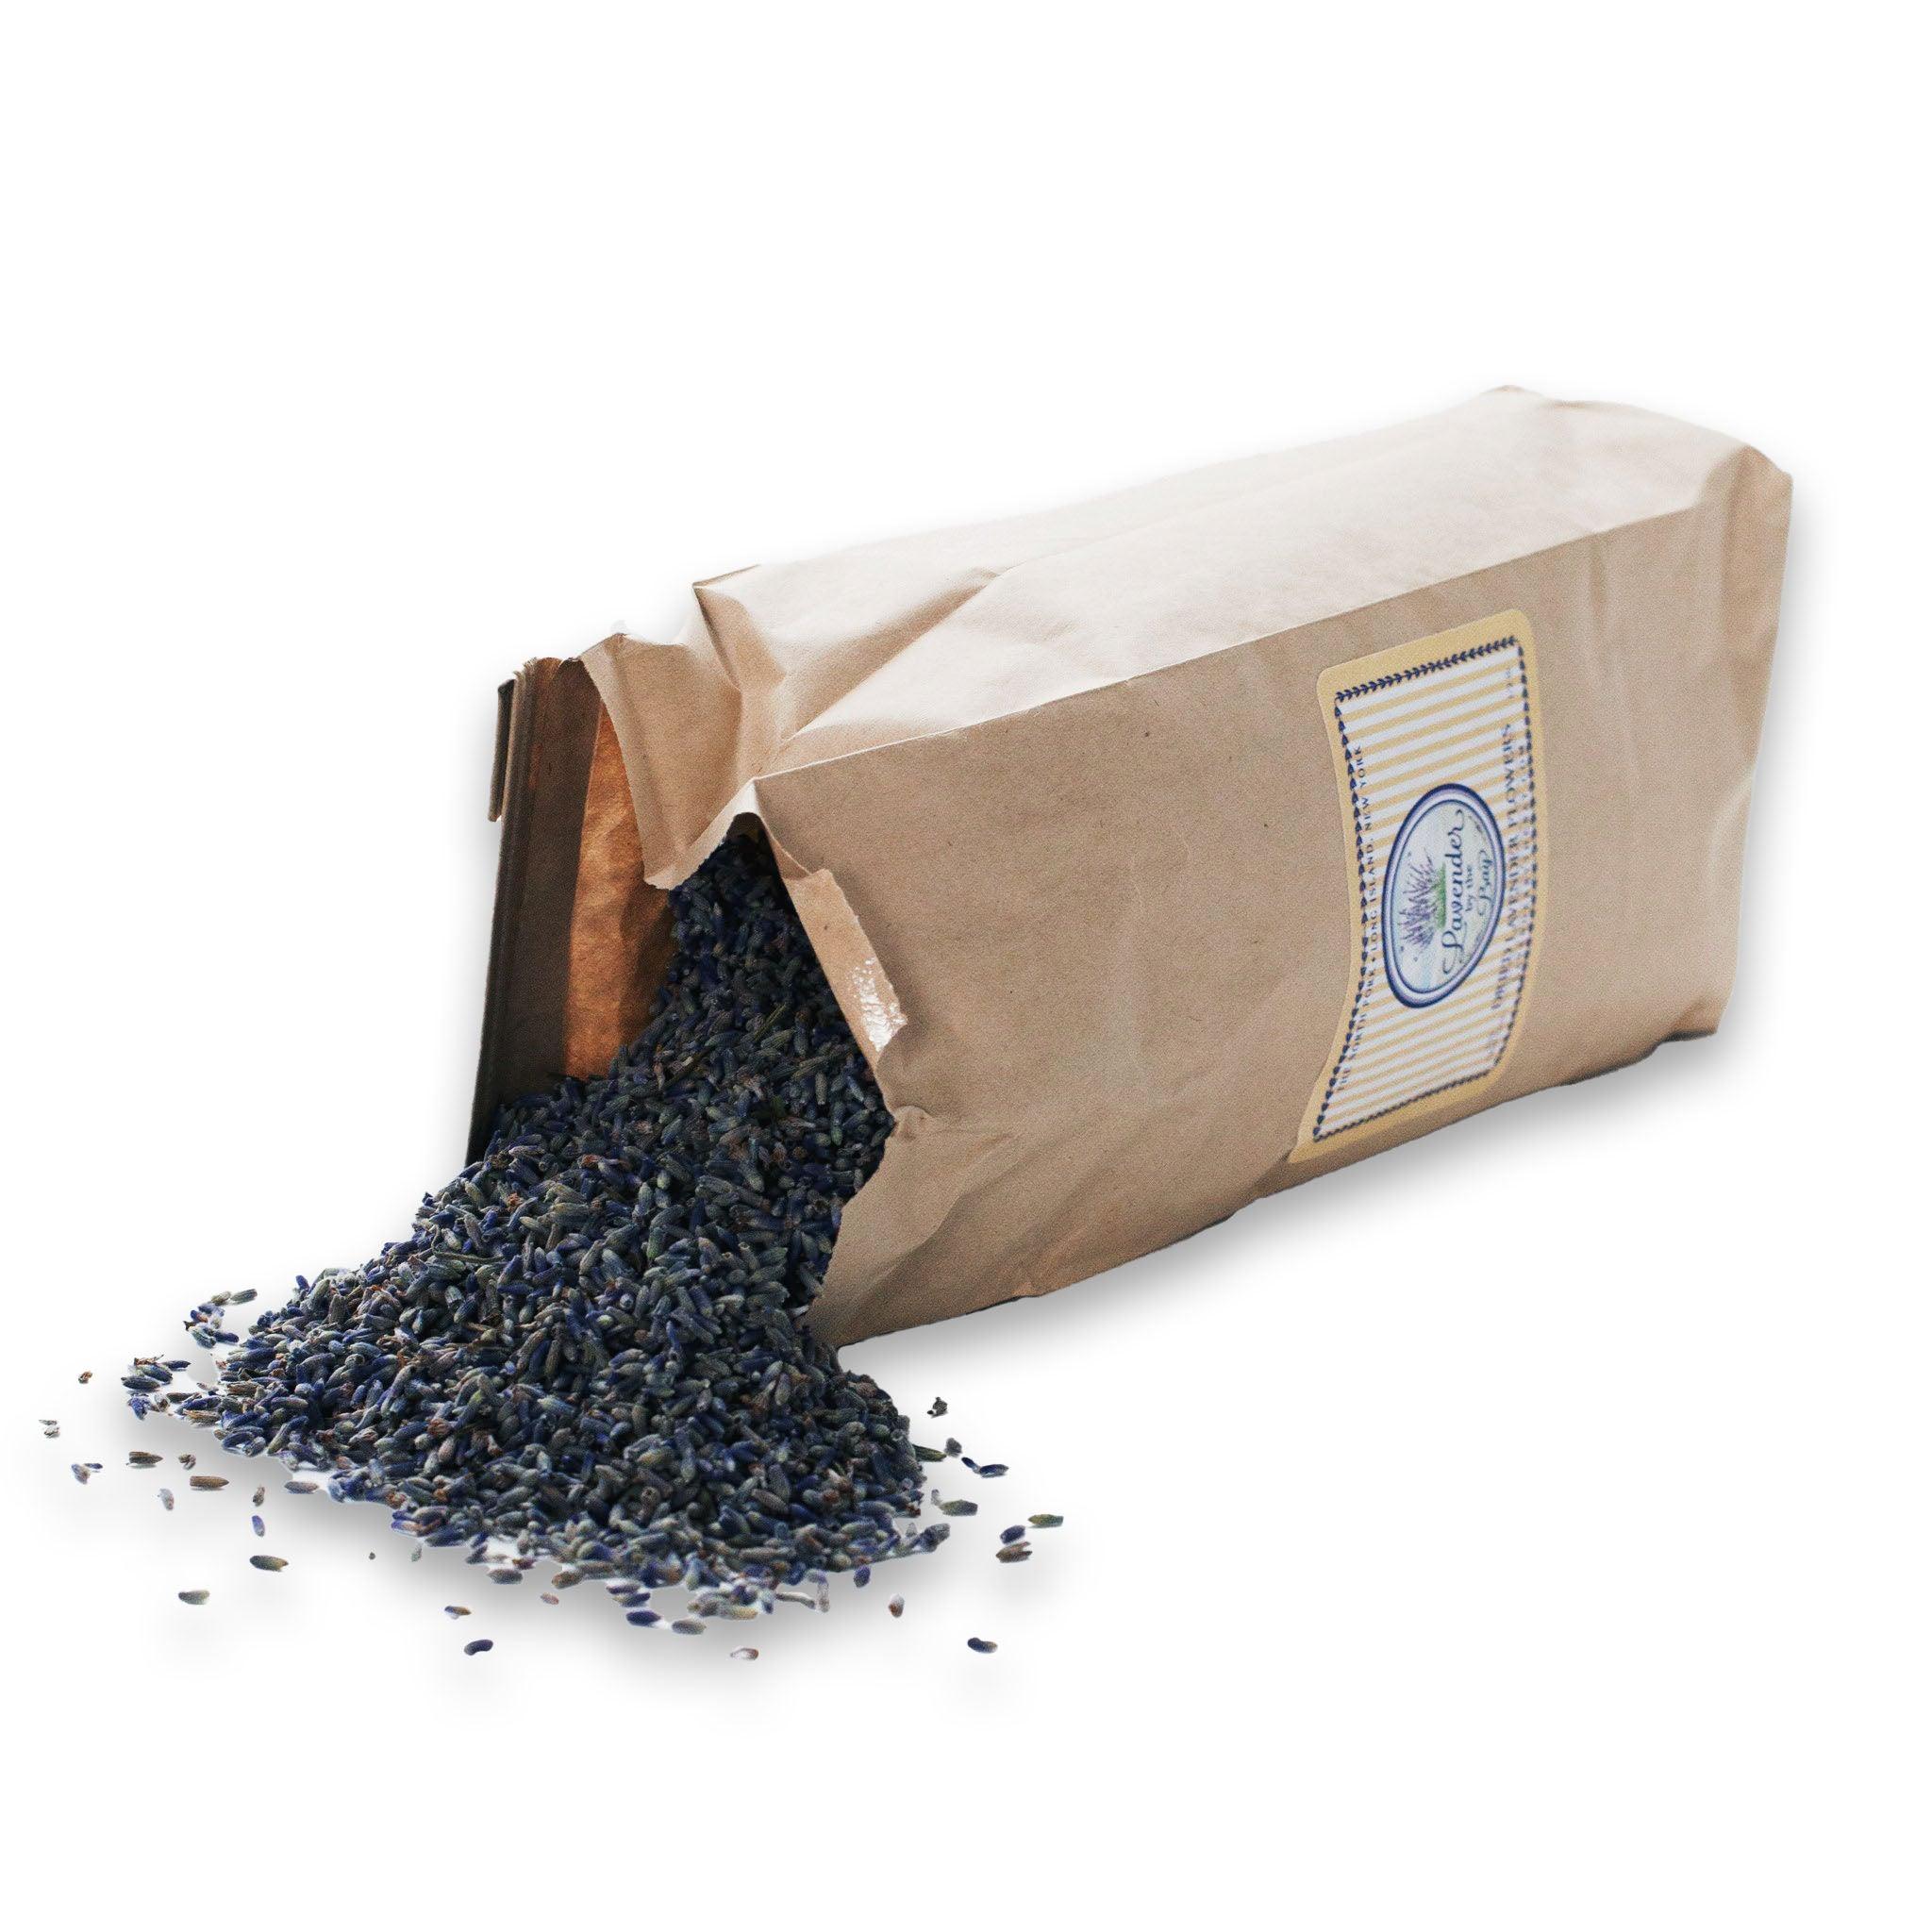 Loose Dried French Lavender 1/2 lb. Bag – For Crafting - Lavender By The Bay